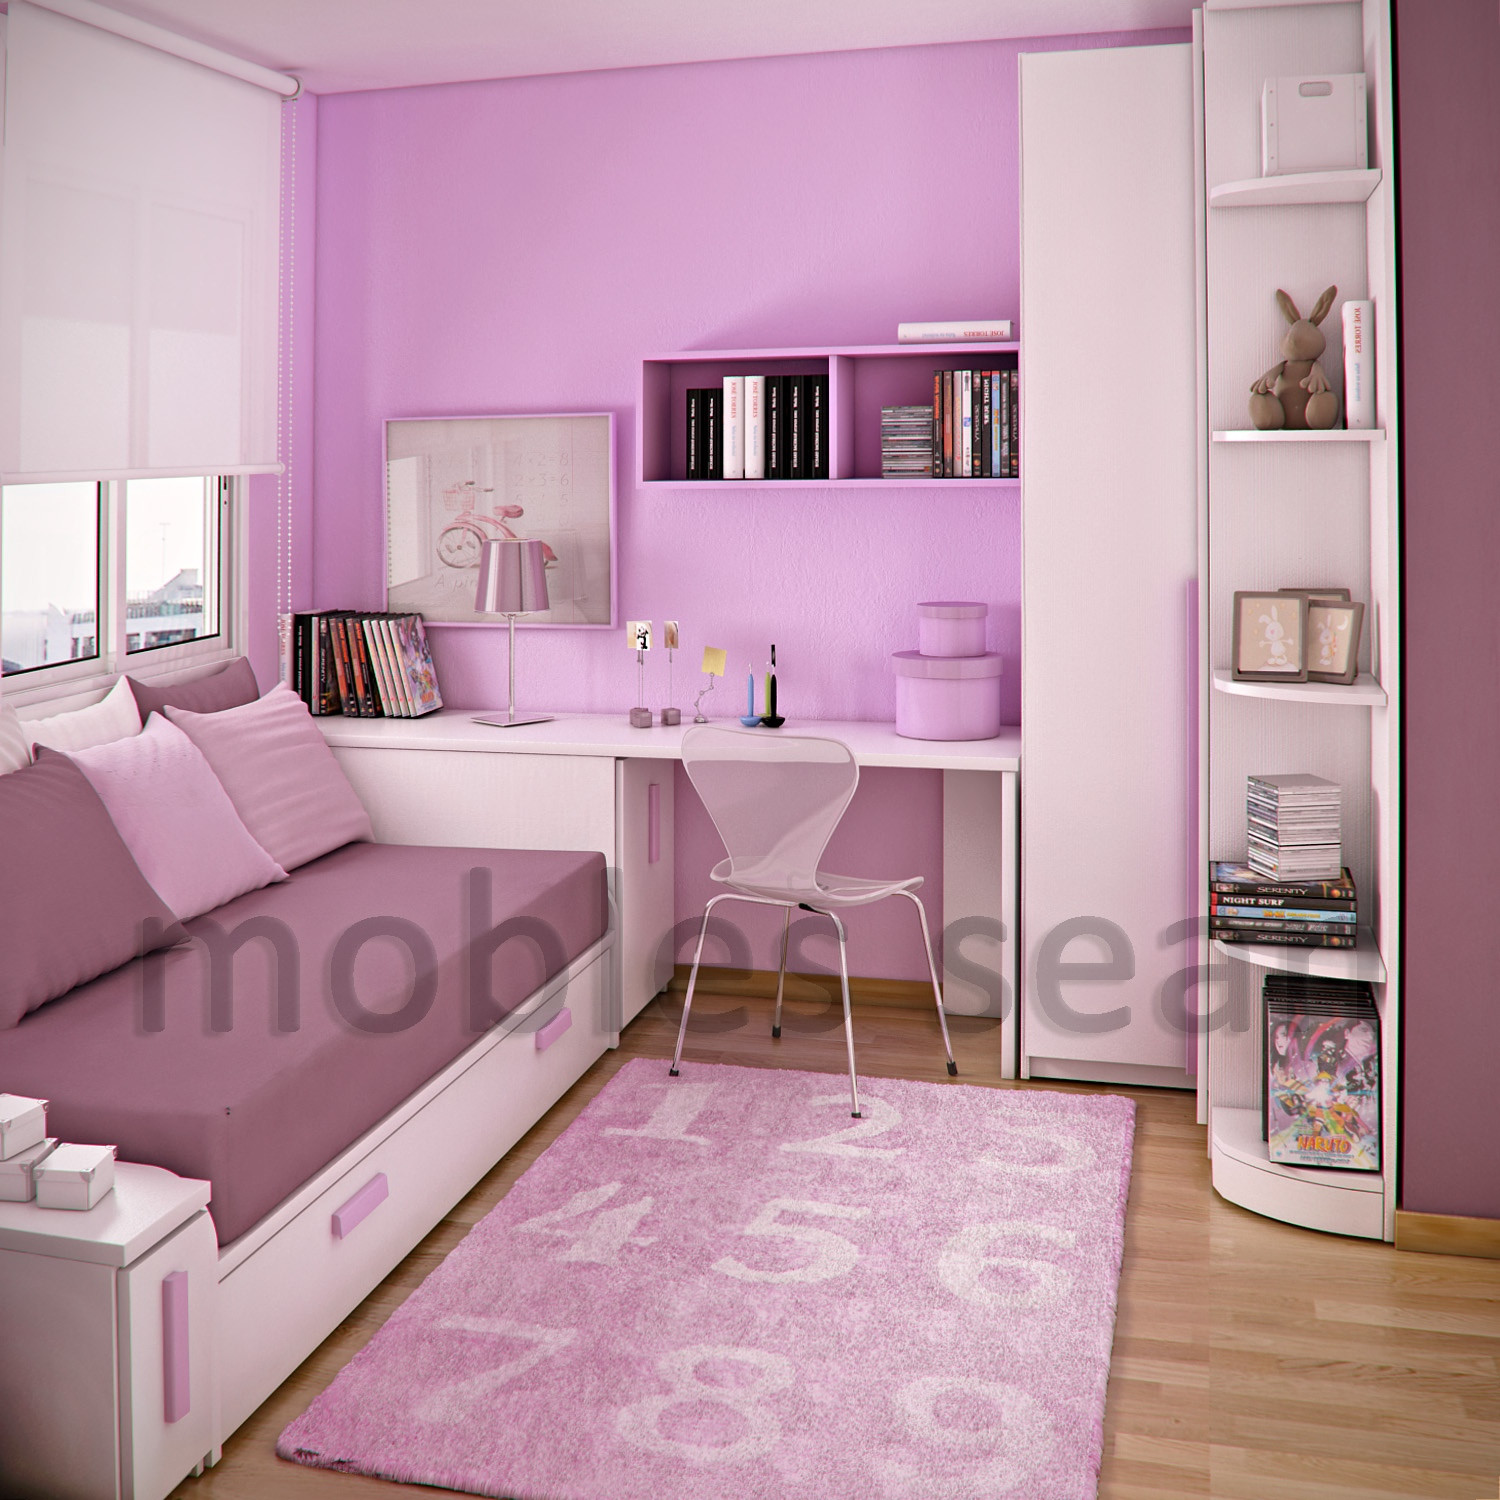 Kids Bedroom Ideas For Small Rooms
 Space Saving Designs for Small Kids’ Rooms Home Decoz